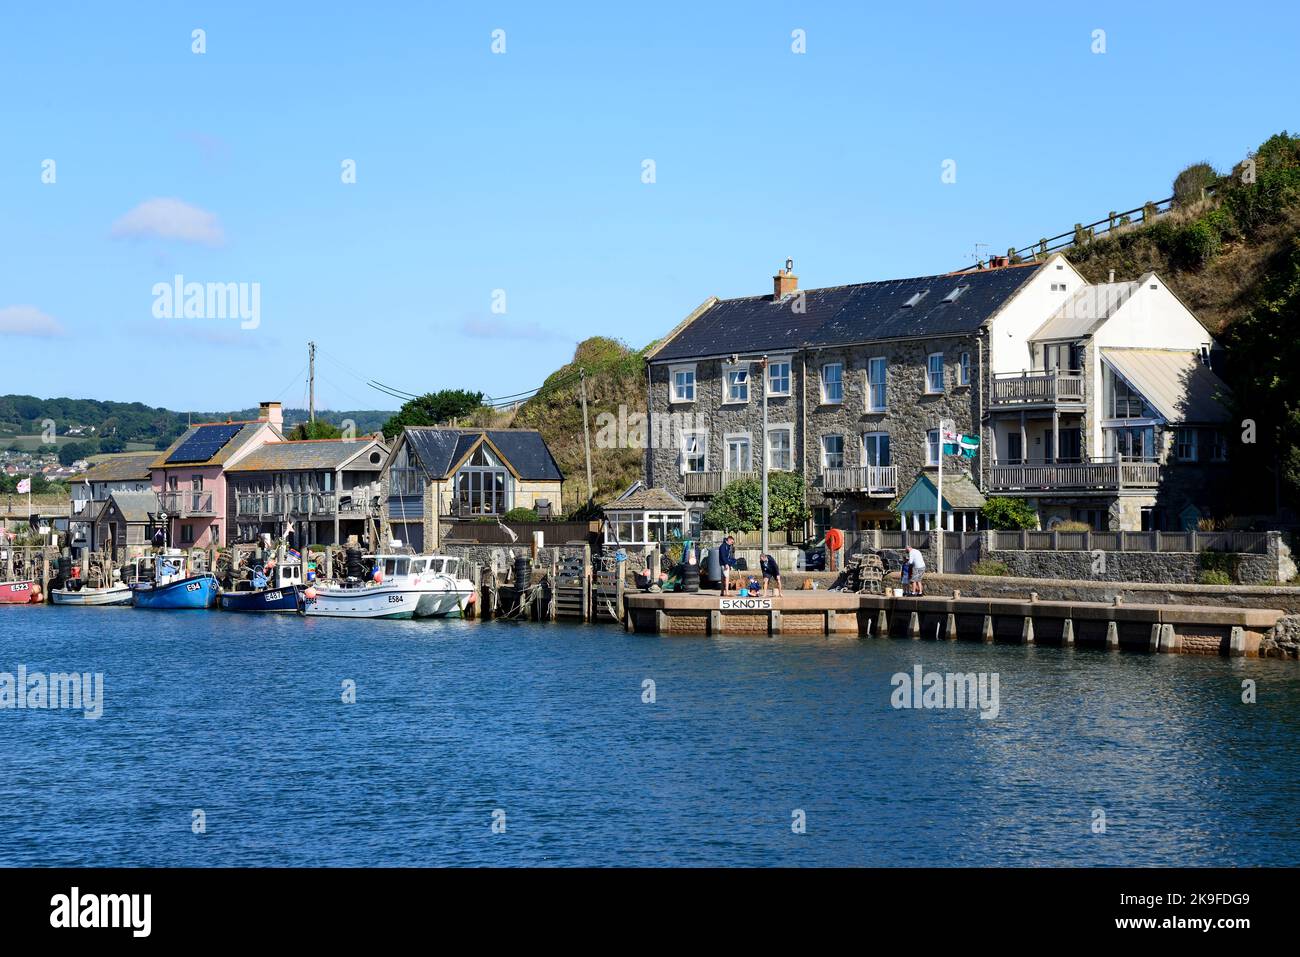 Boats moored along the waterfront along the River Axe with waterfront buildings to the rear, Axmouth, Devon, UK, Europe. Stock Photo